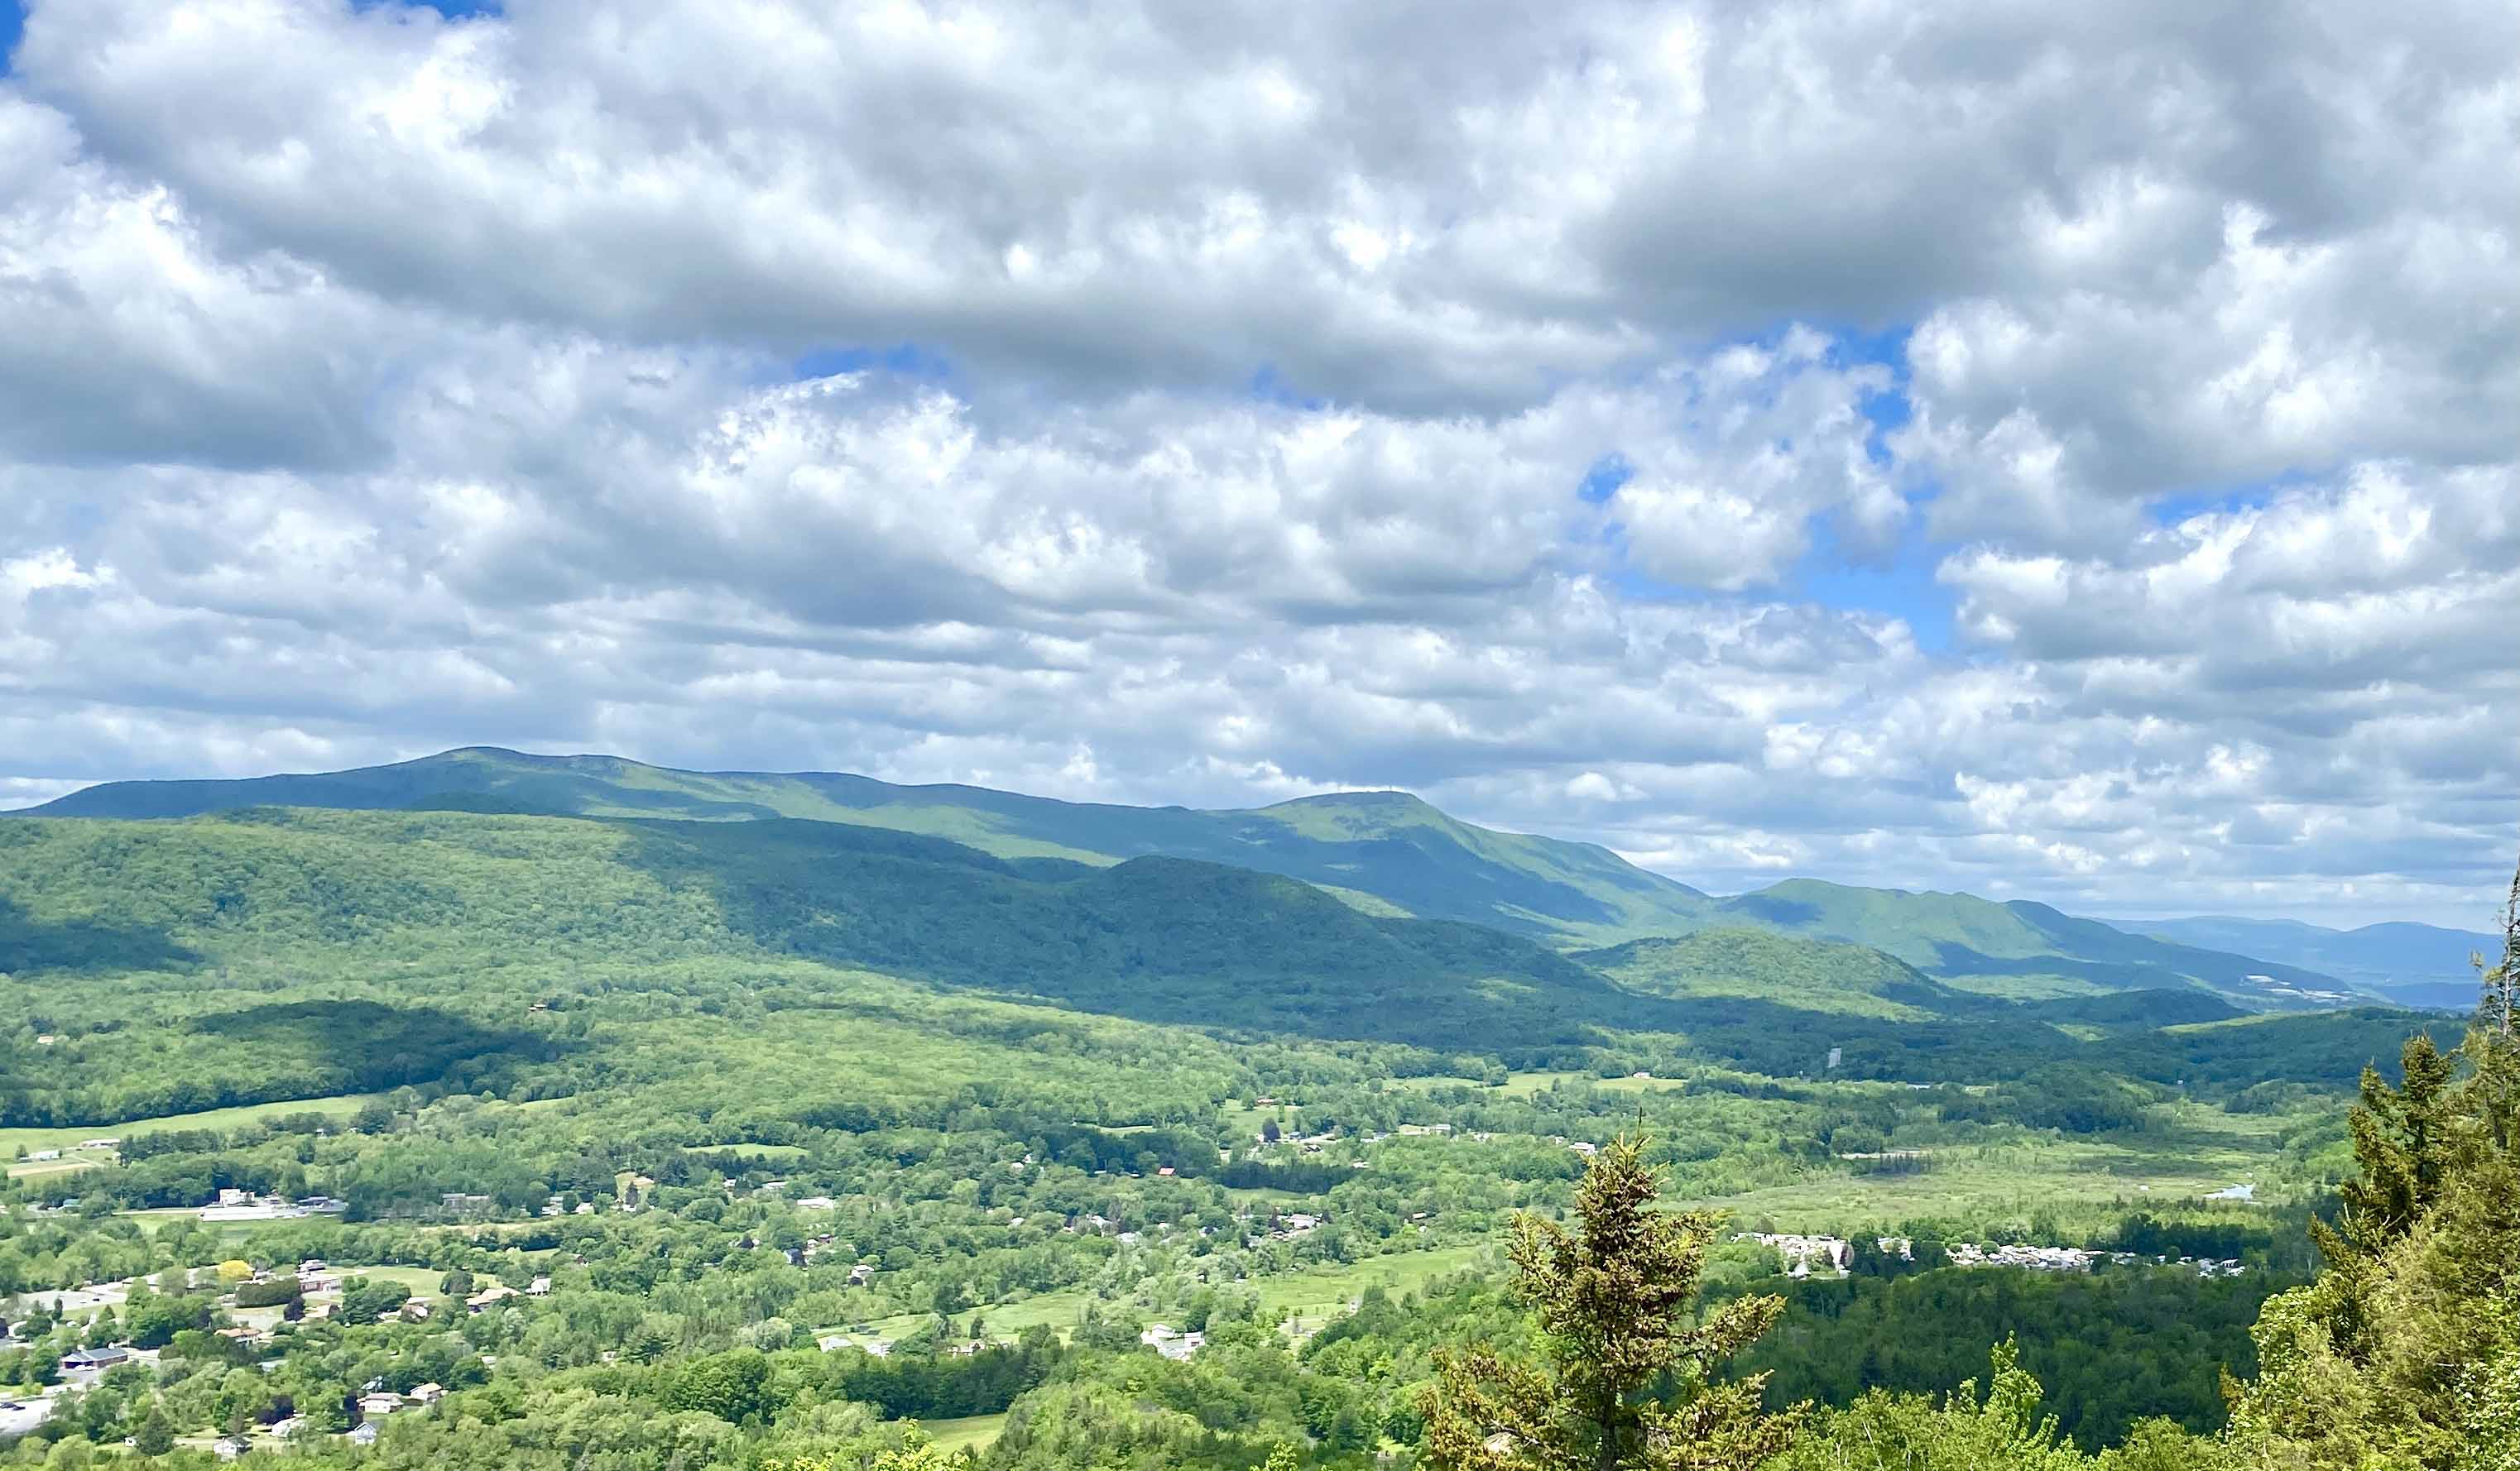 mm 1.7 View of Mount Greylock from the Cobbles Overlook side trail  Courtesy WardandDA@gmail.com